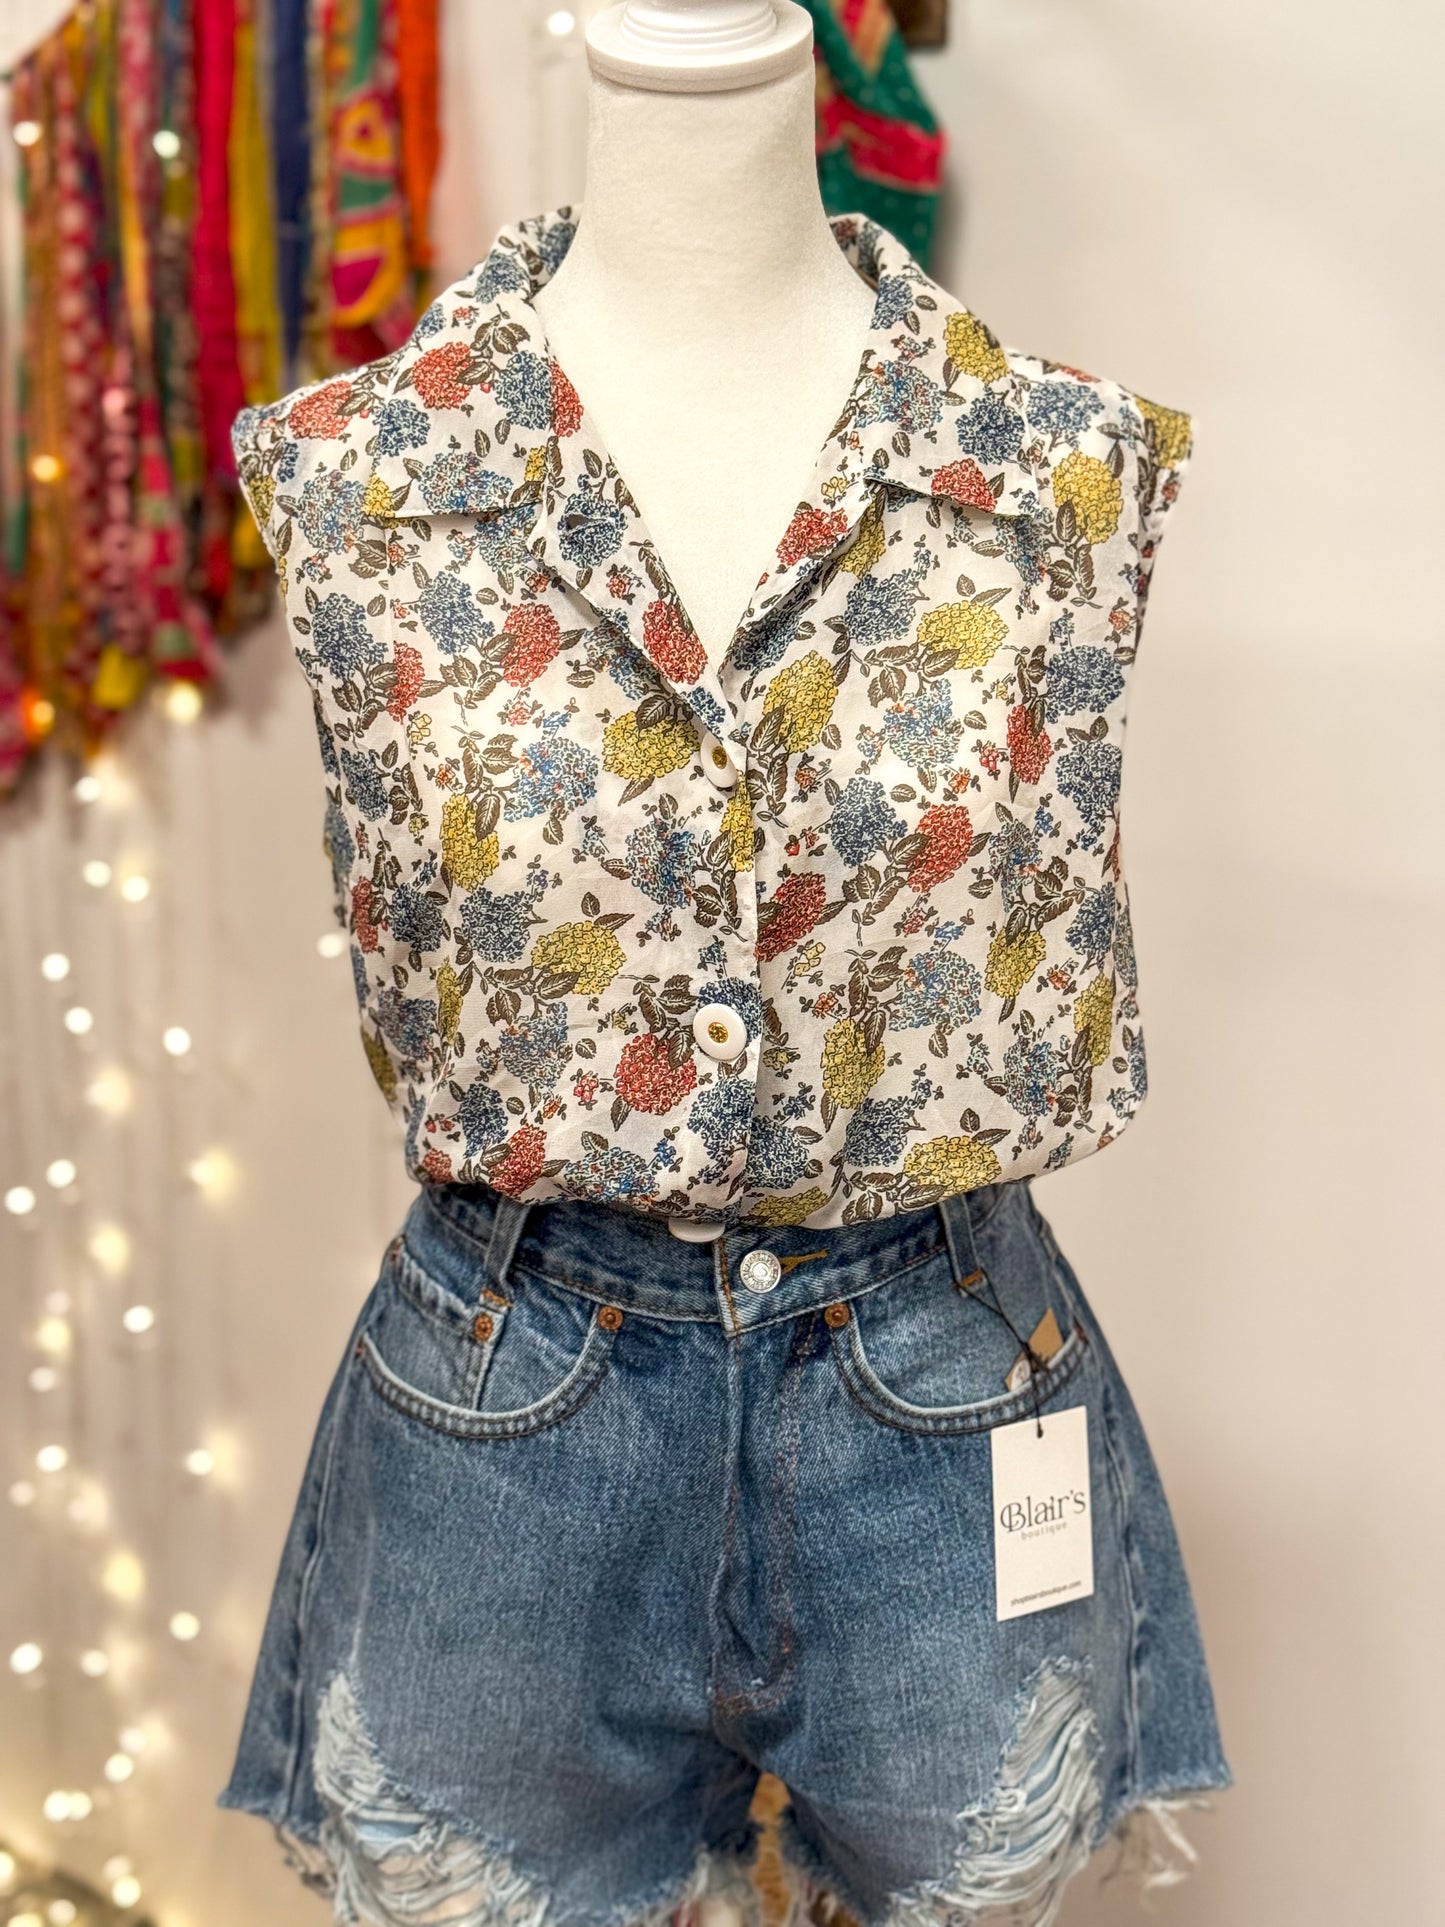 Upcycled Top - Sleeveless Button-Up Blouse - Cinched Waist